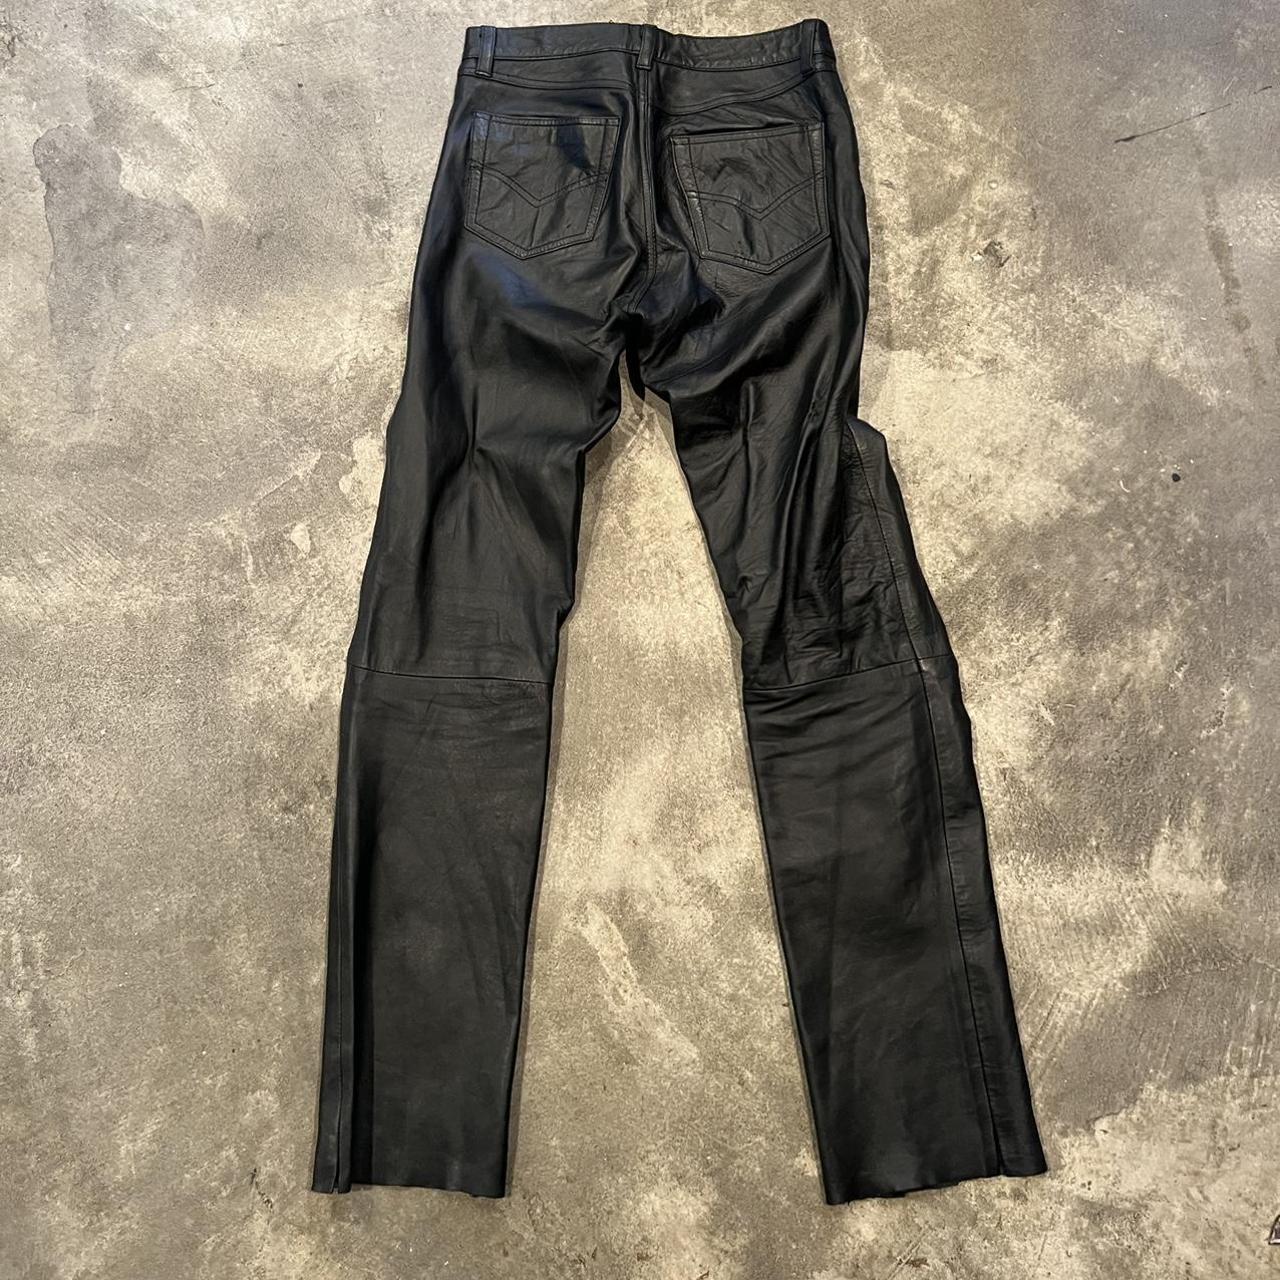 Vintage leather pants, Great quality Worn once,... - Depop